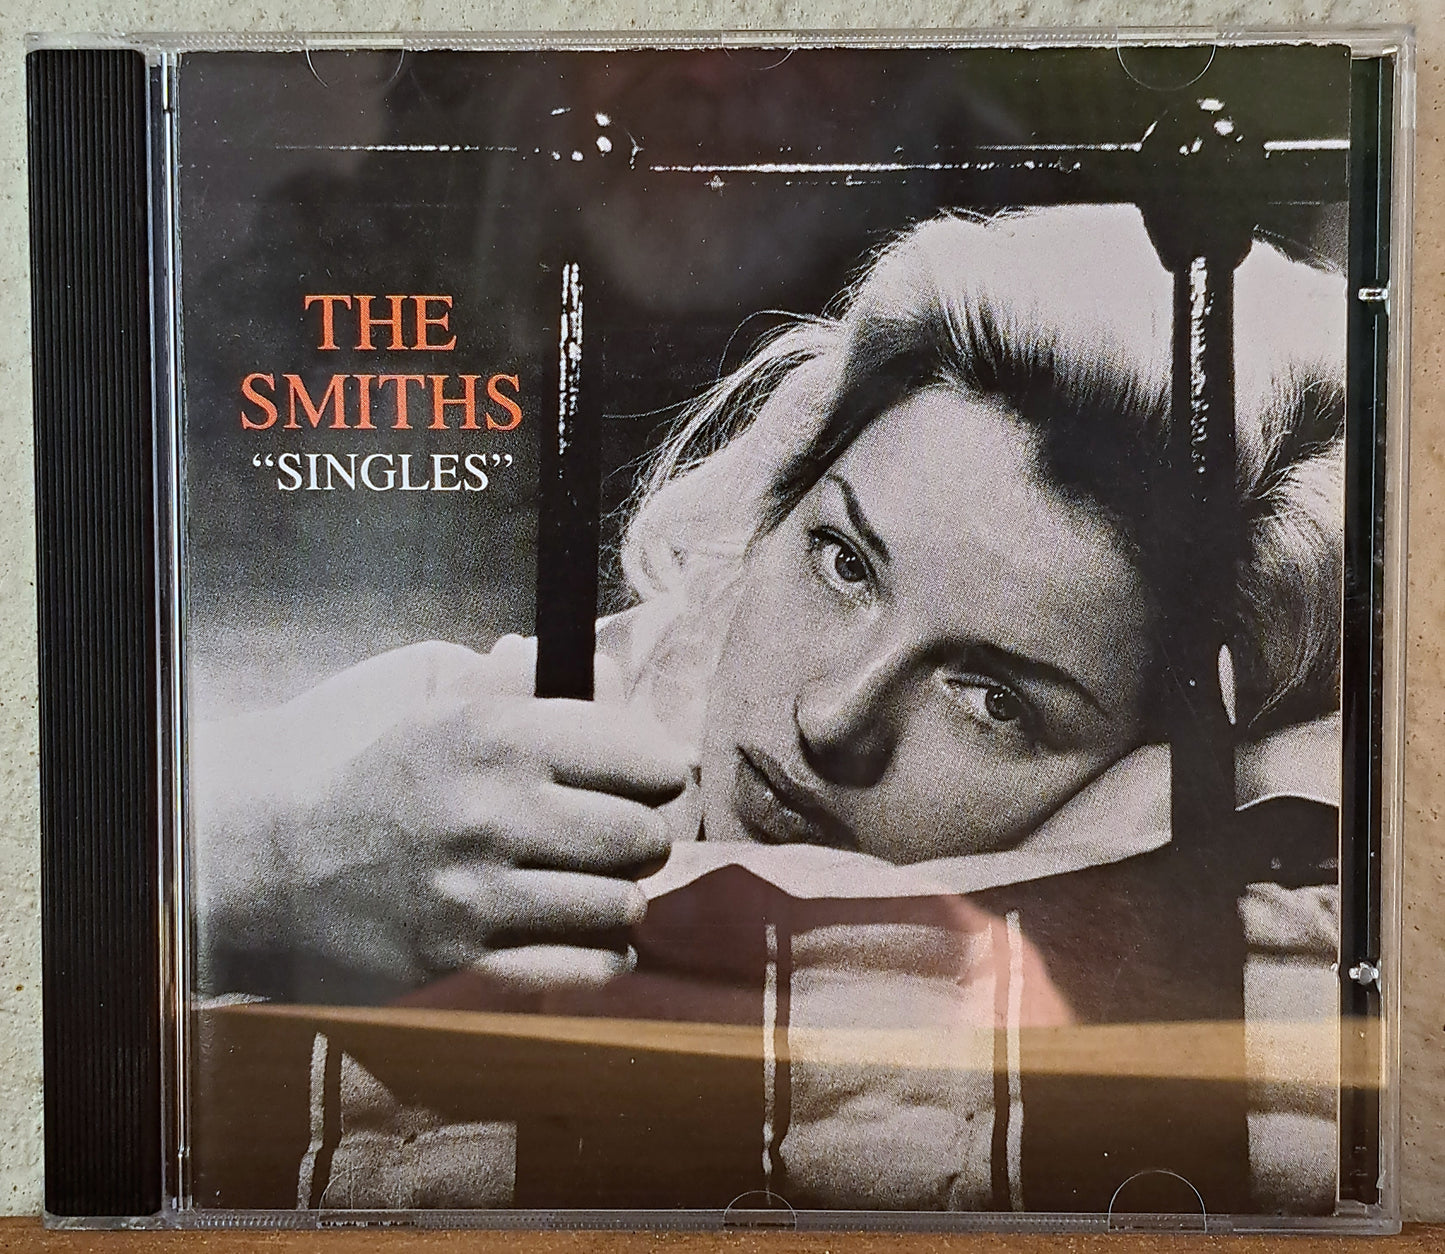 The Smiths - "Singles" (cd)